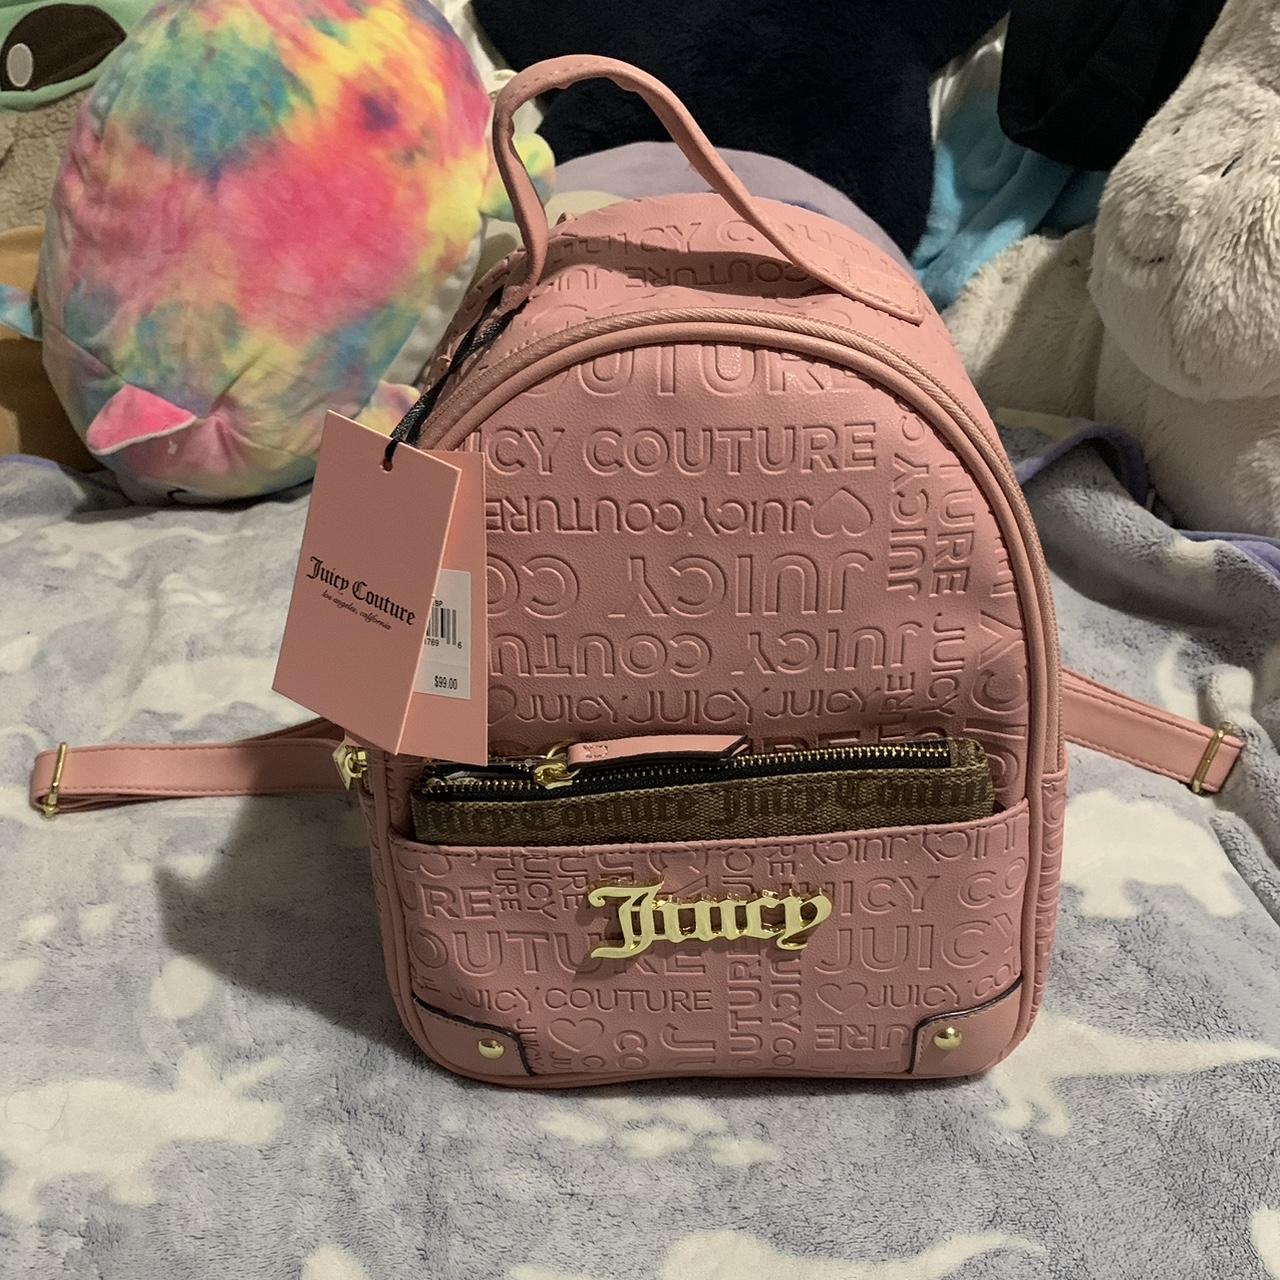 Juicy Couture, Bags, Juicy Couture Backpack